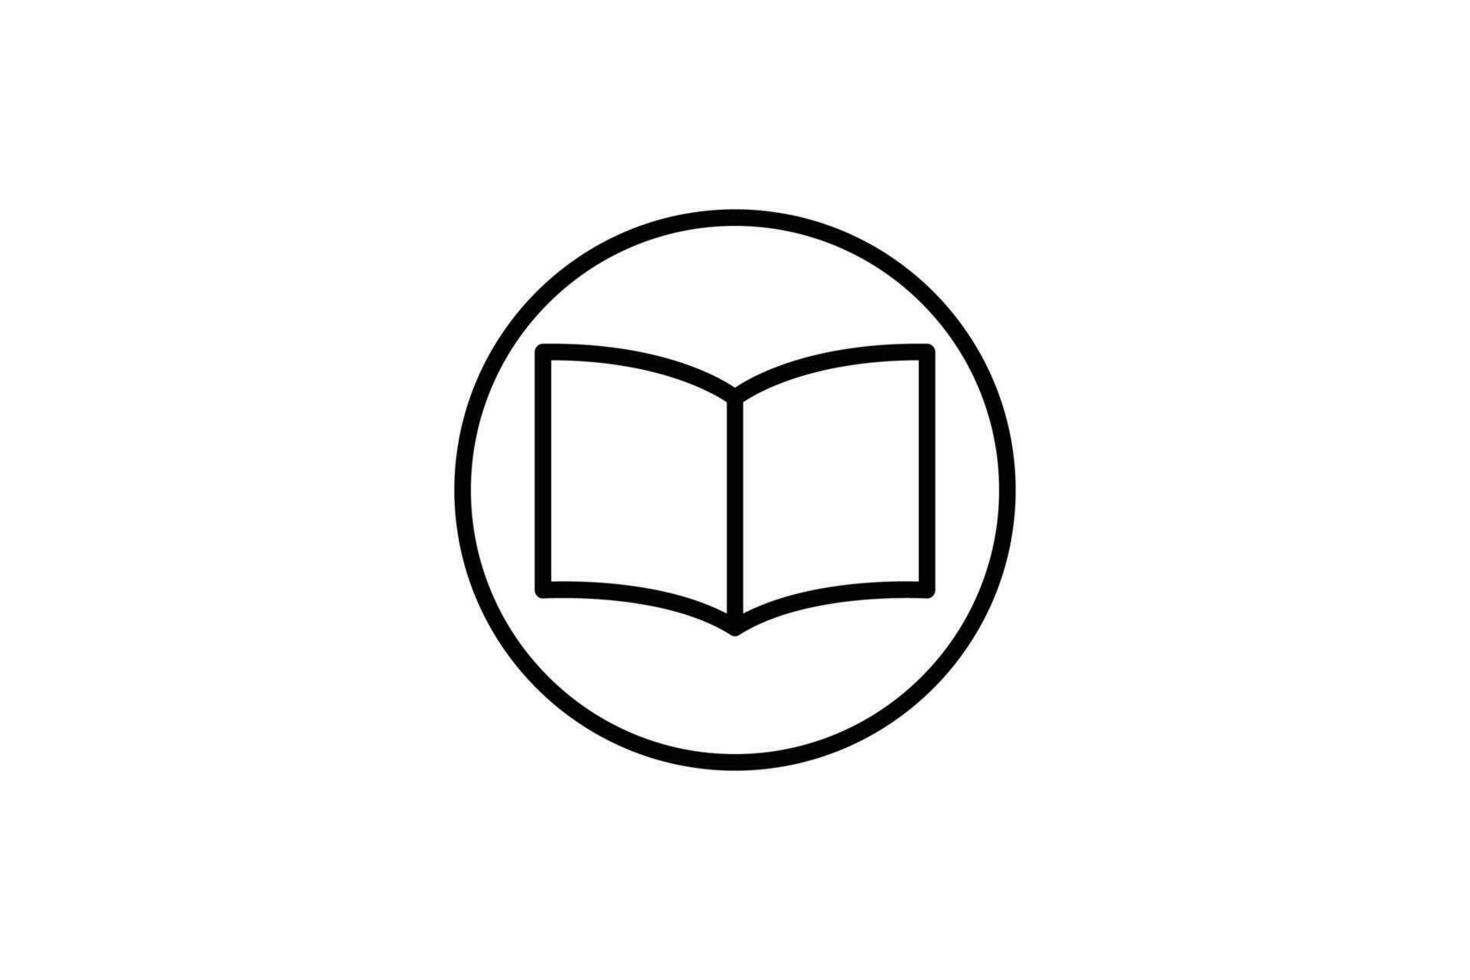 Open book icon. Icon related to research or knowledge. icon suitable for web site design, app, user interfaces, printable etc. Line icon style. Simple vector design editable